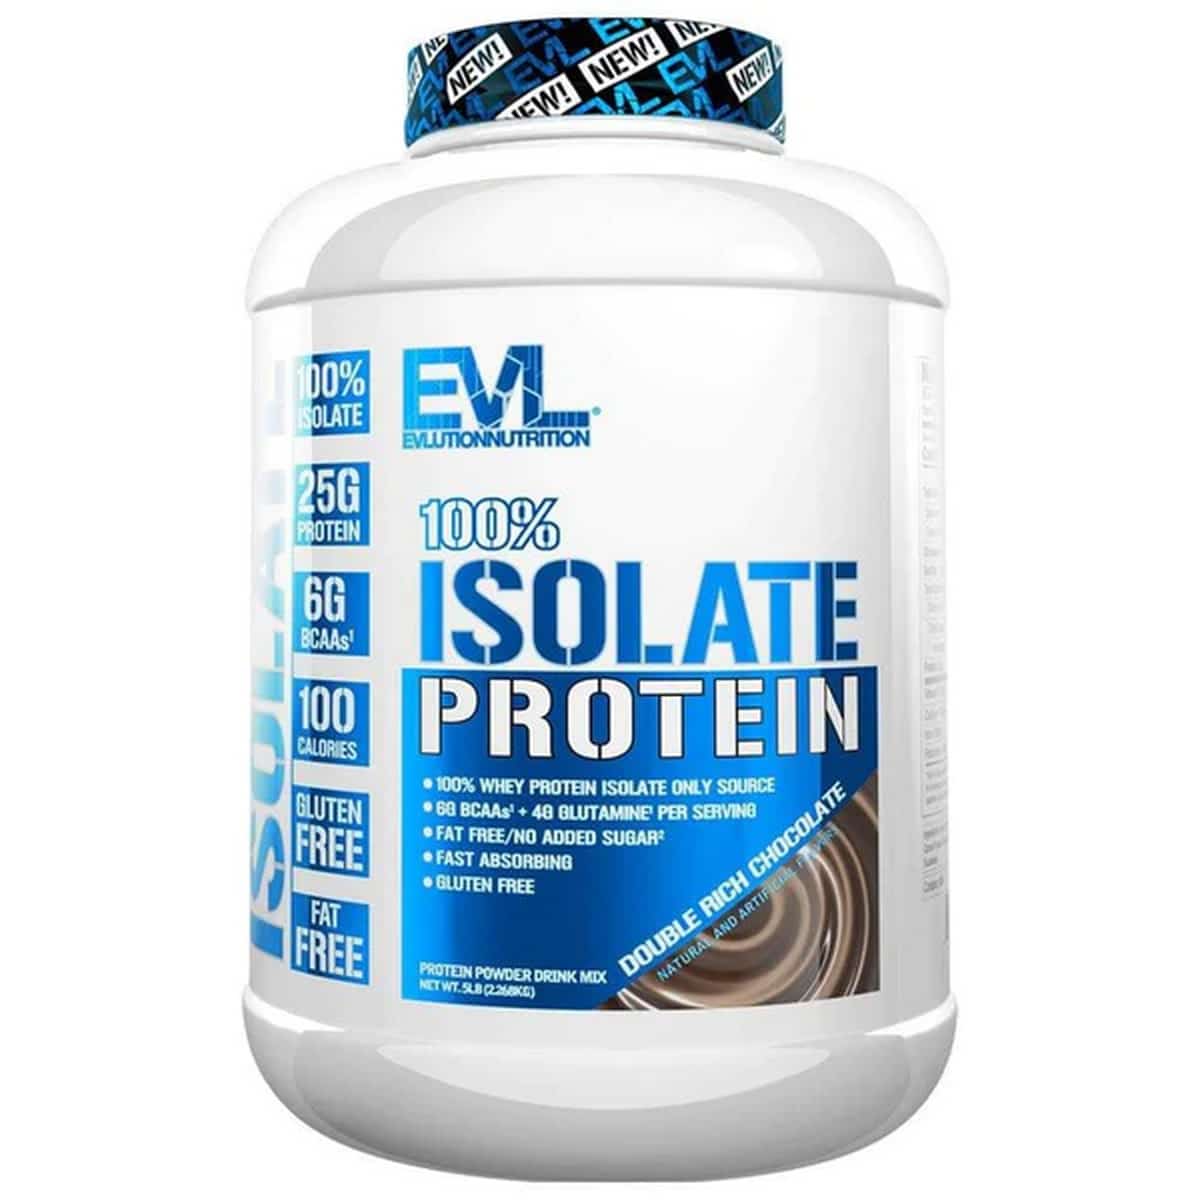 Whey Protein Isolate Powder - Rich Chocolate (5 Lbs. / 71 Servings